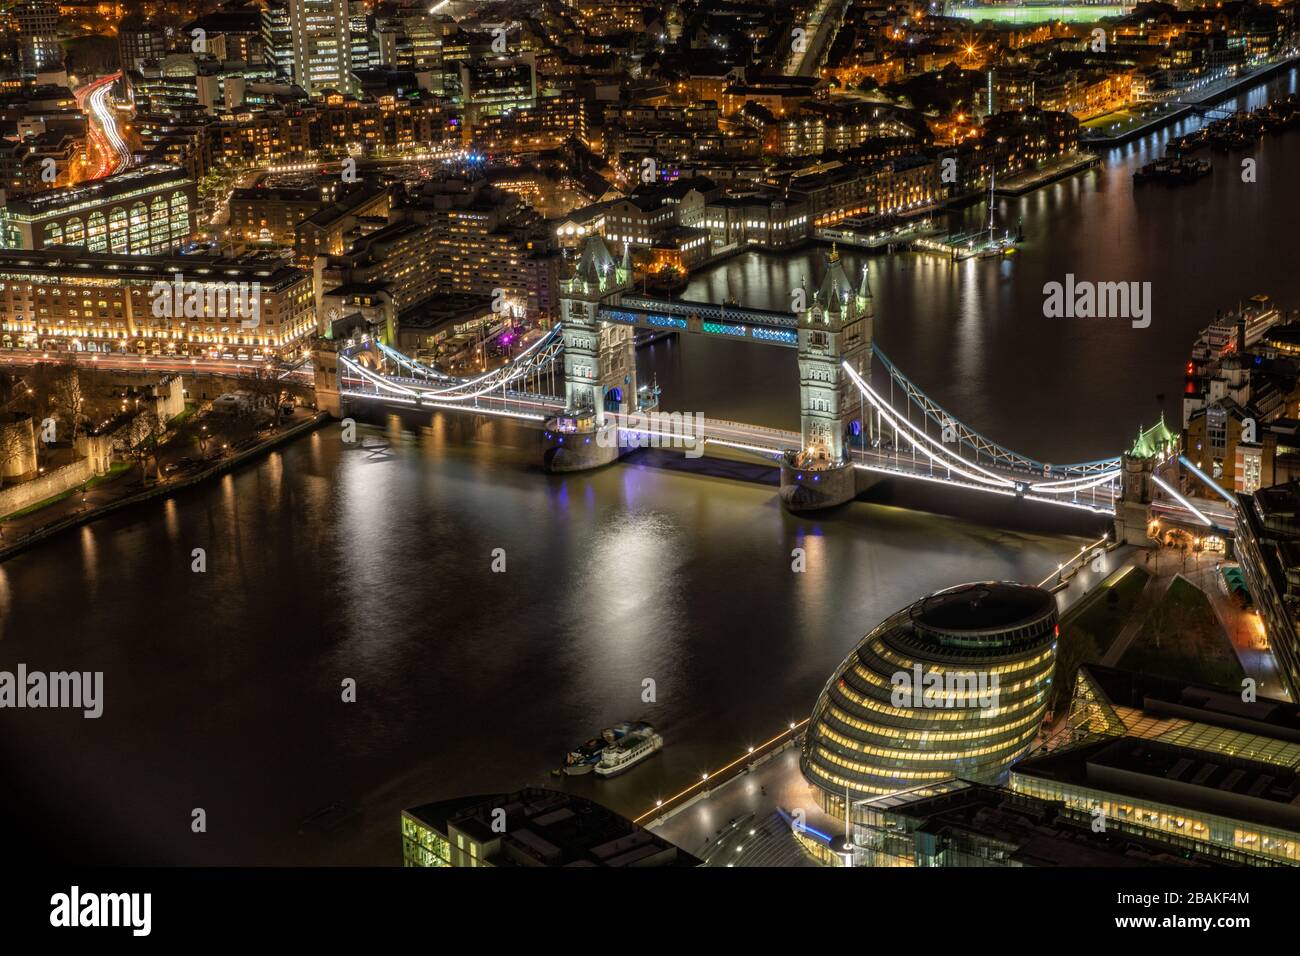 Tower Bridge over the River Thames at night with illuminated office buildings, the tower of London and leading towards Canary Wharf Stock Photo